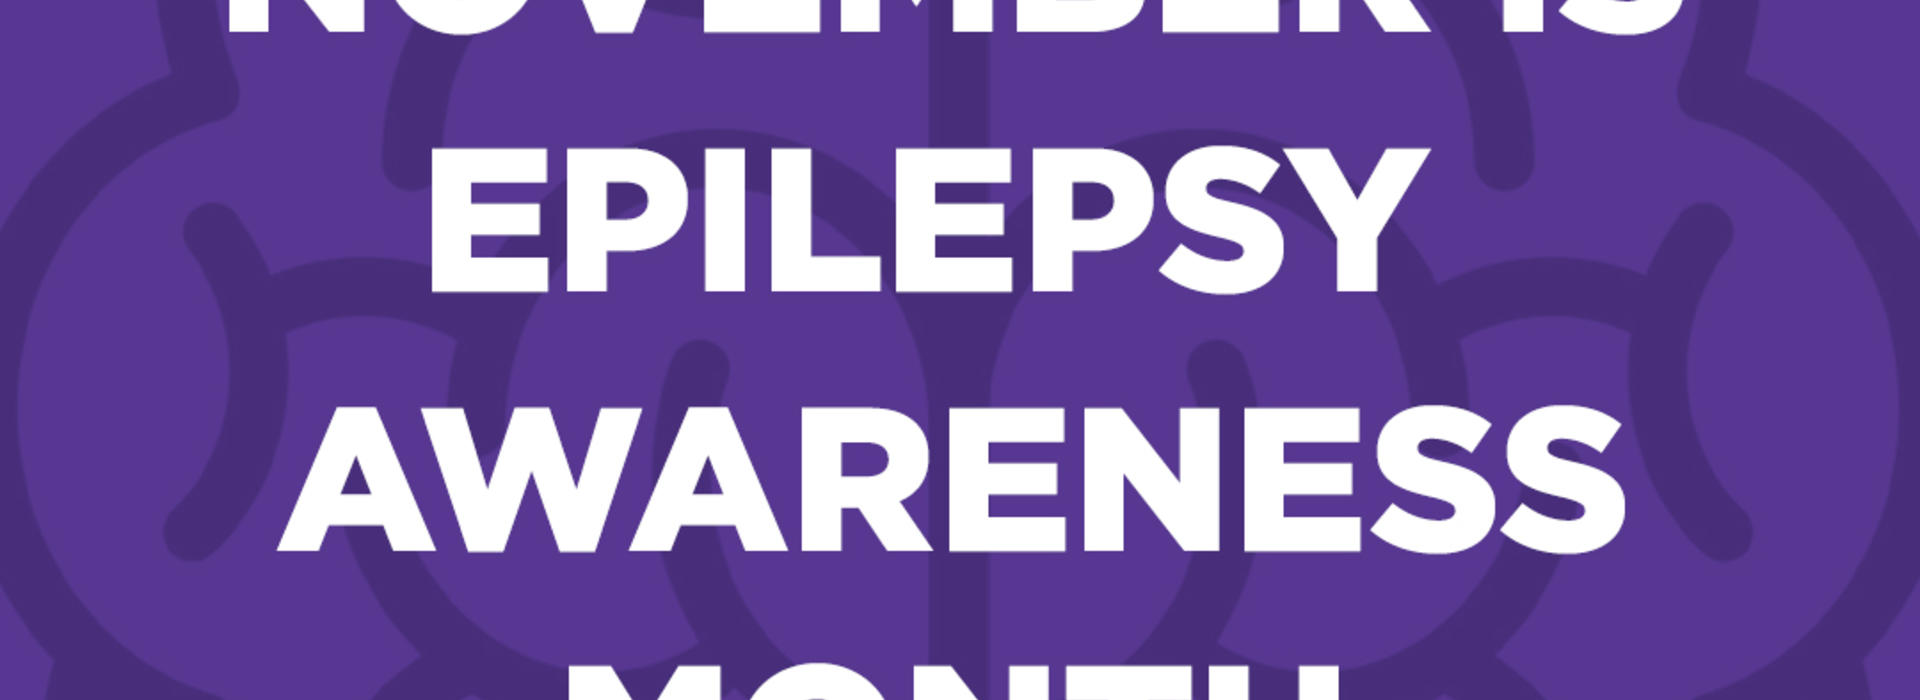 Epilepsy Awareness Month Graphic